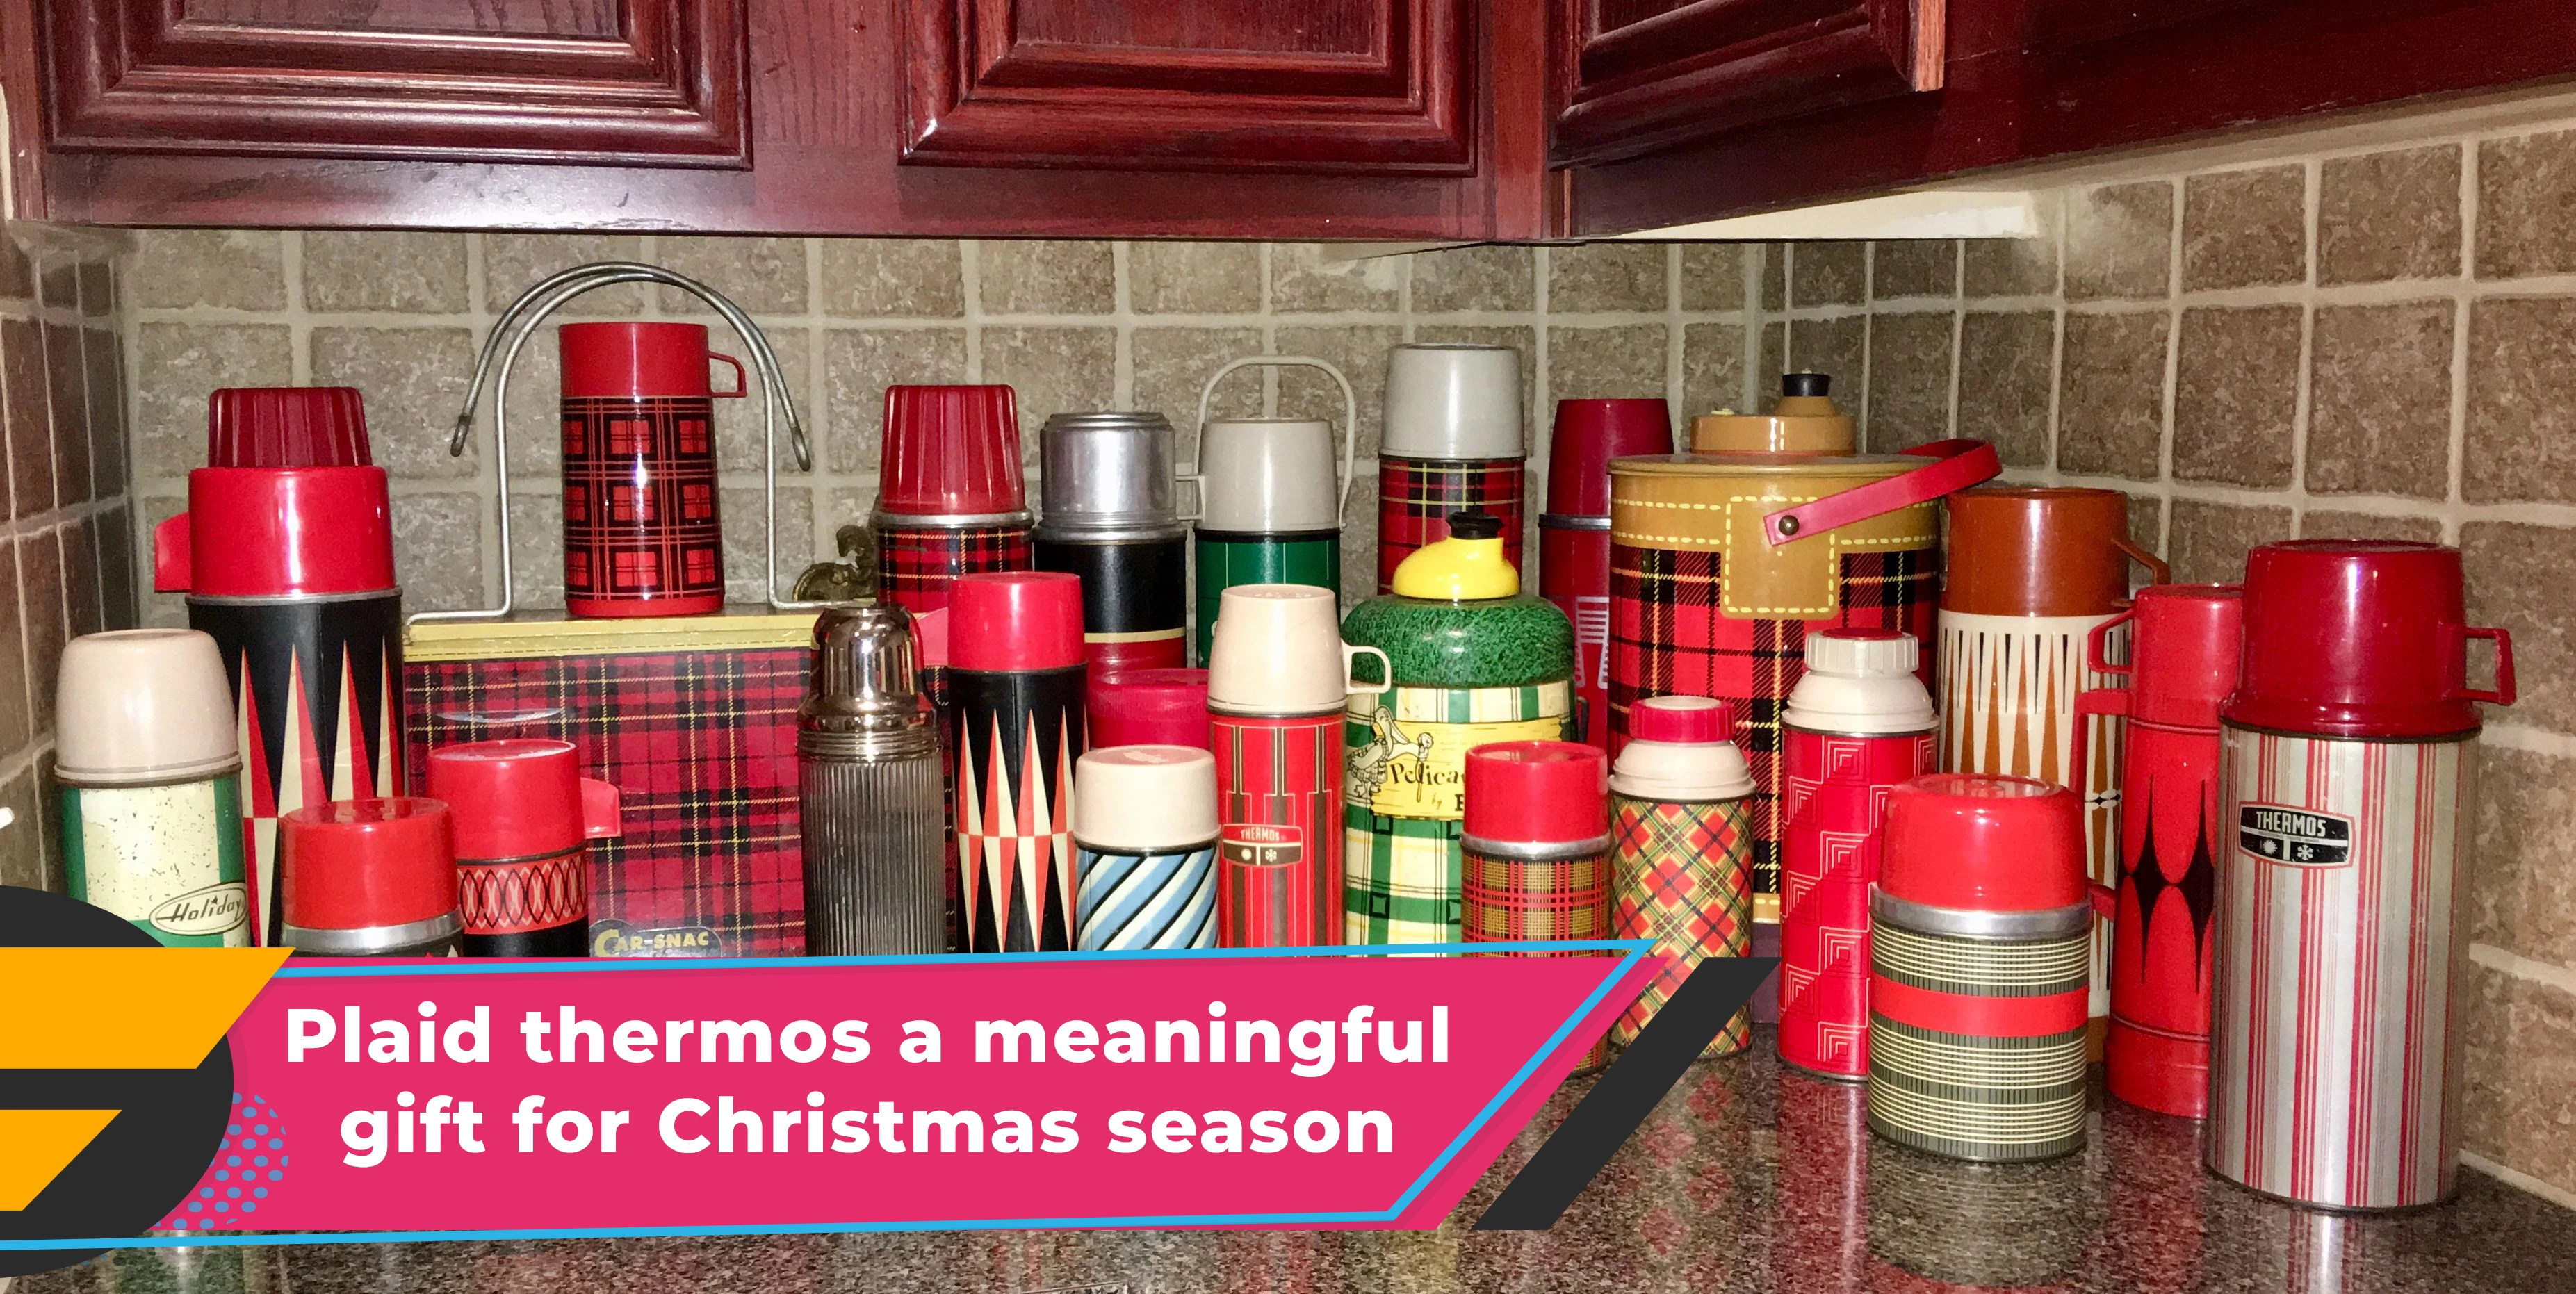 Plaid thermos a meaningful gift for Christmas season